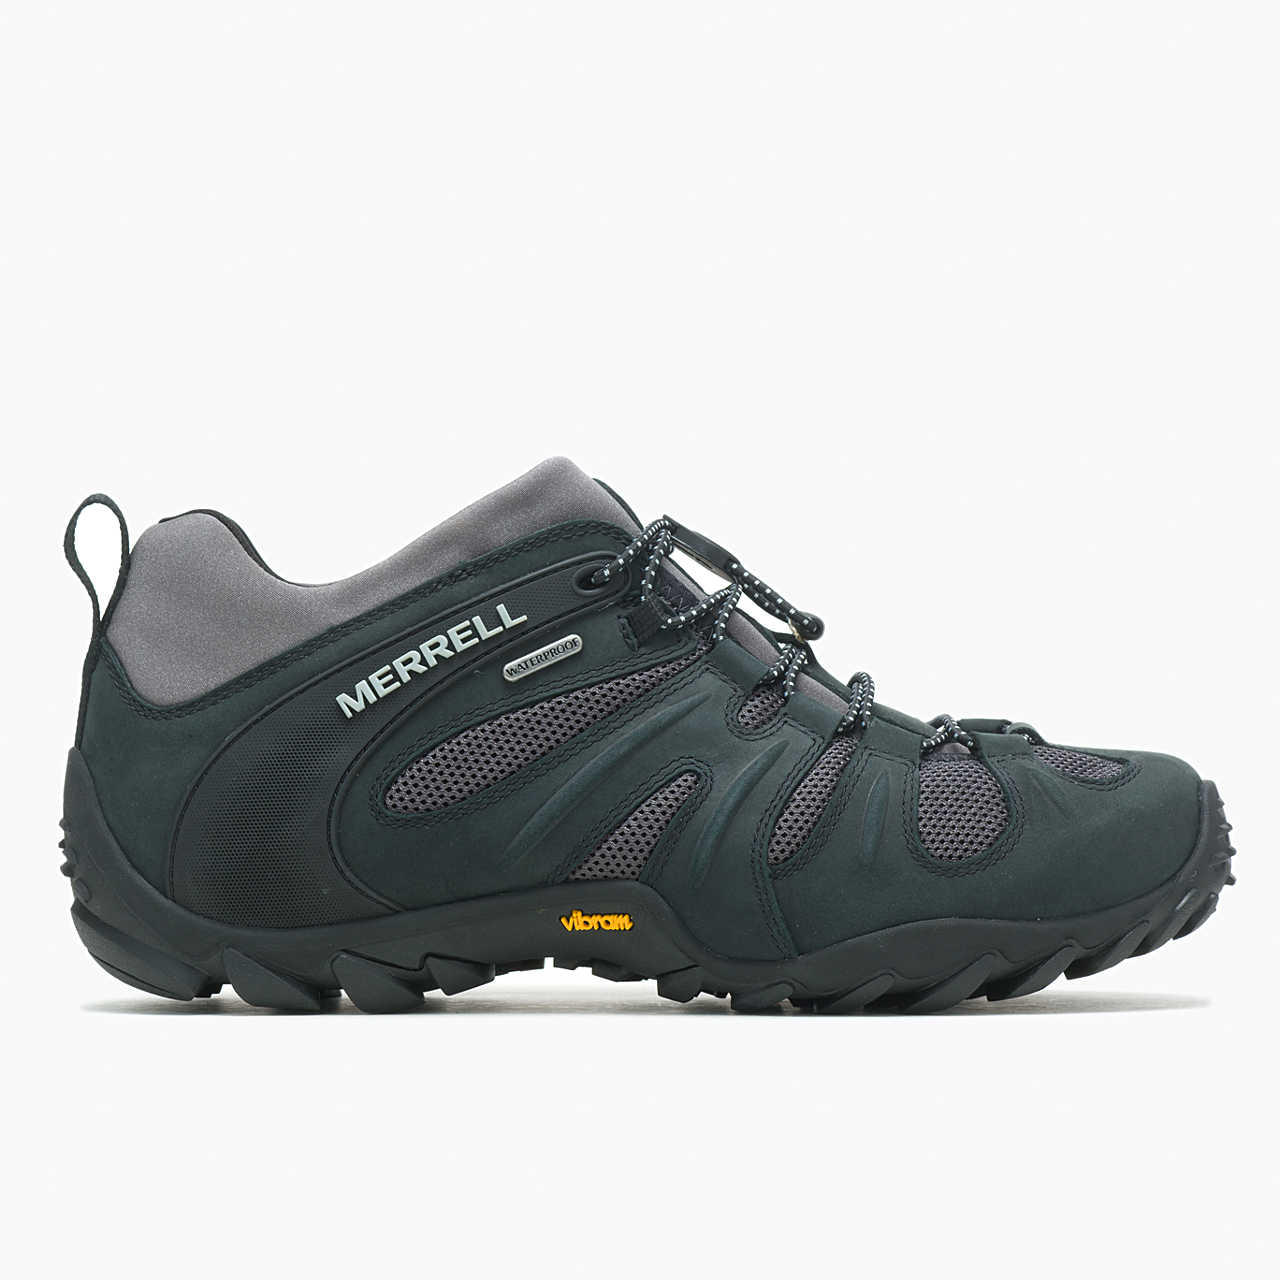 Men's & Unisex Hiking Boots & Clothing - Shoes| Merrell